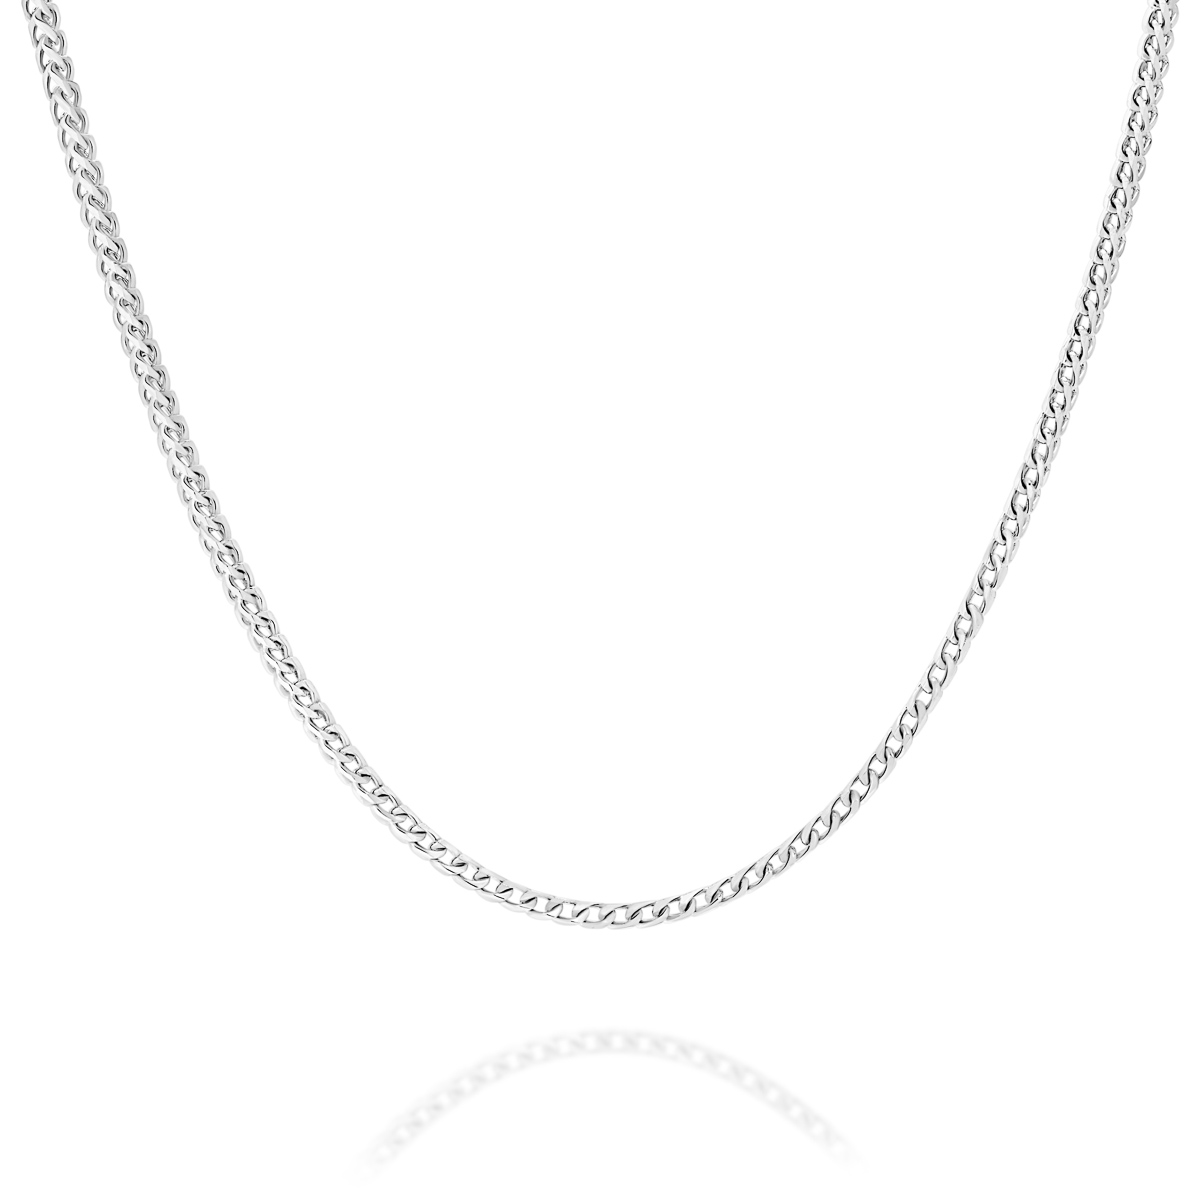 18K White Gold Wheat Link Polished Finish Chain - Small